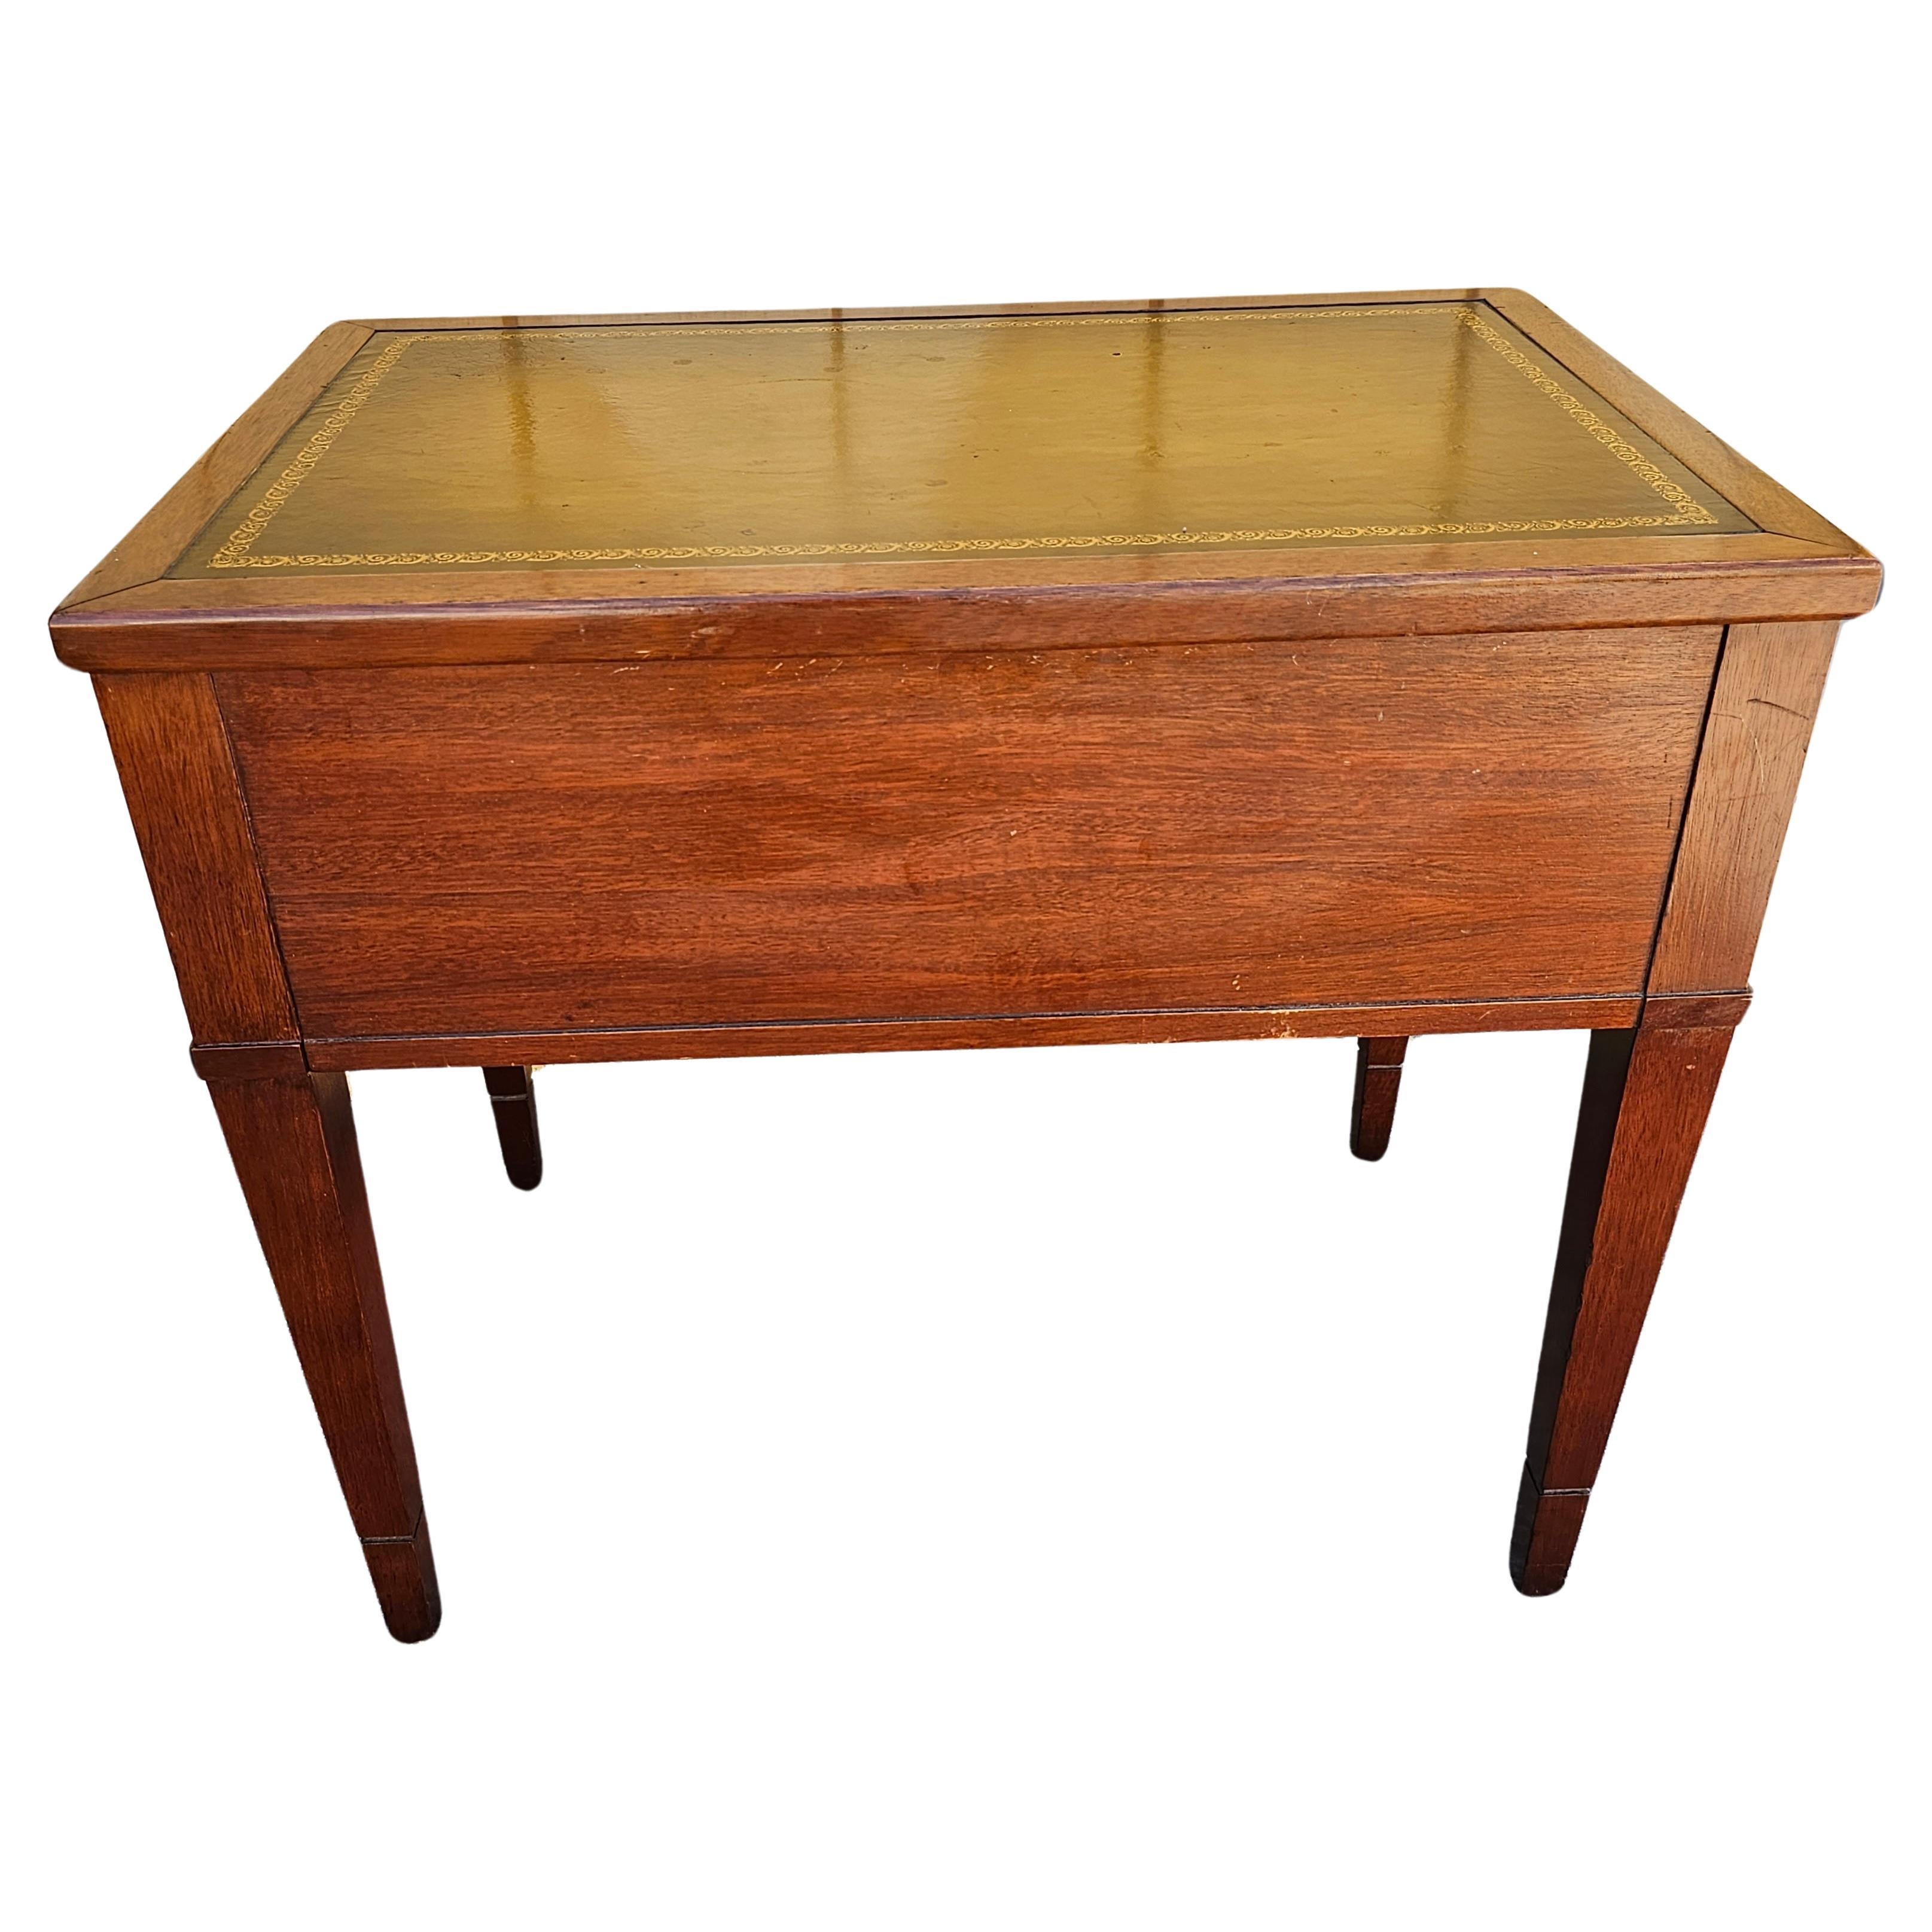 Stained Mid-Century Mersman Mahogany and Stenciled Leather Top Side Tables, Pair For Sale